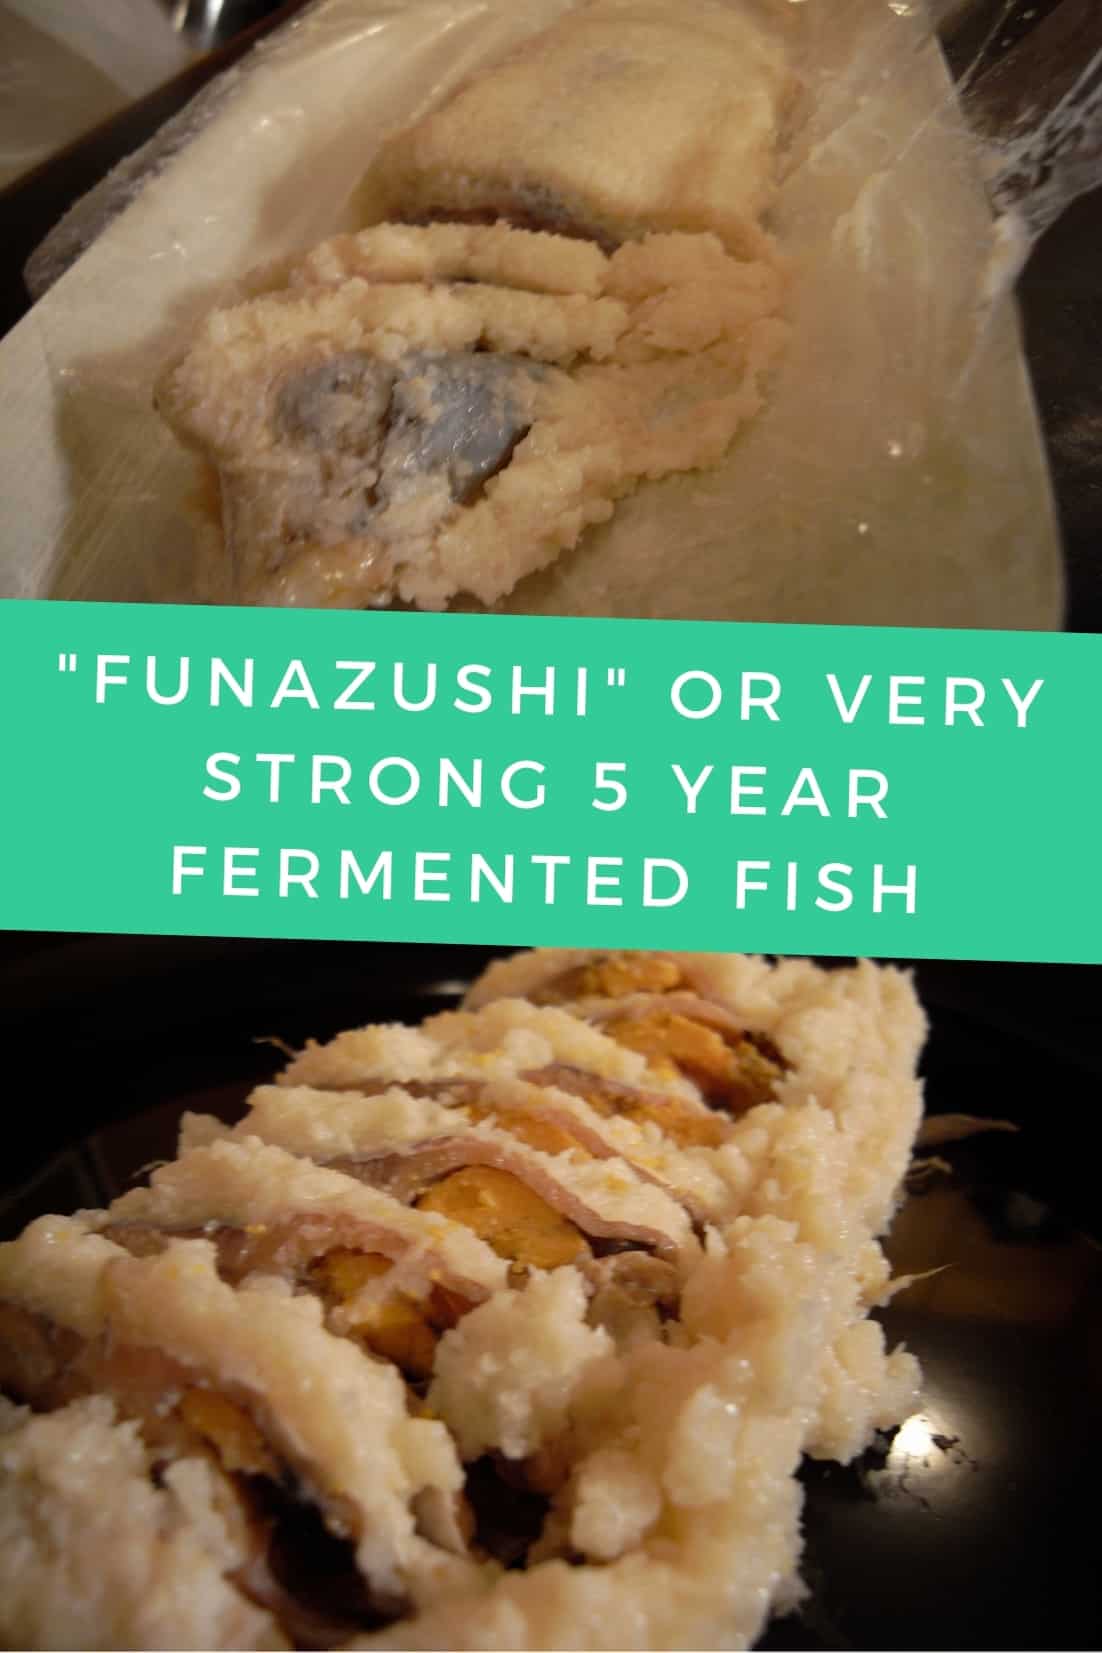 funazushi or very strong 5 year fermented fish